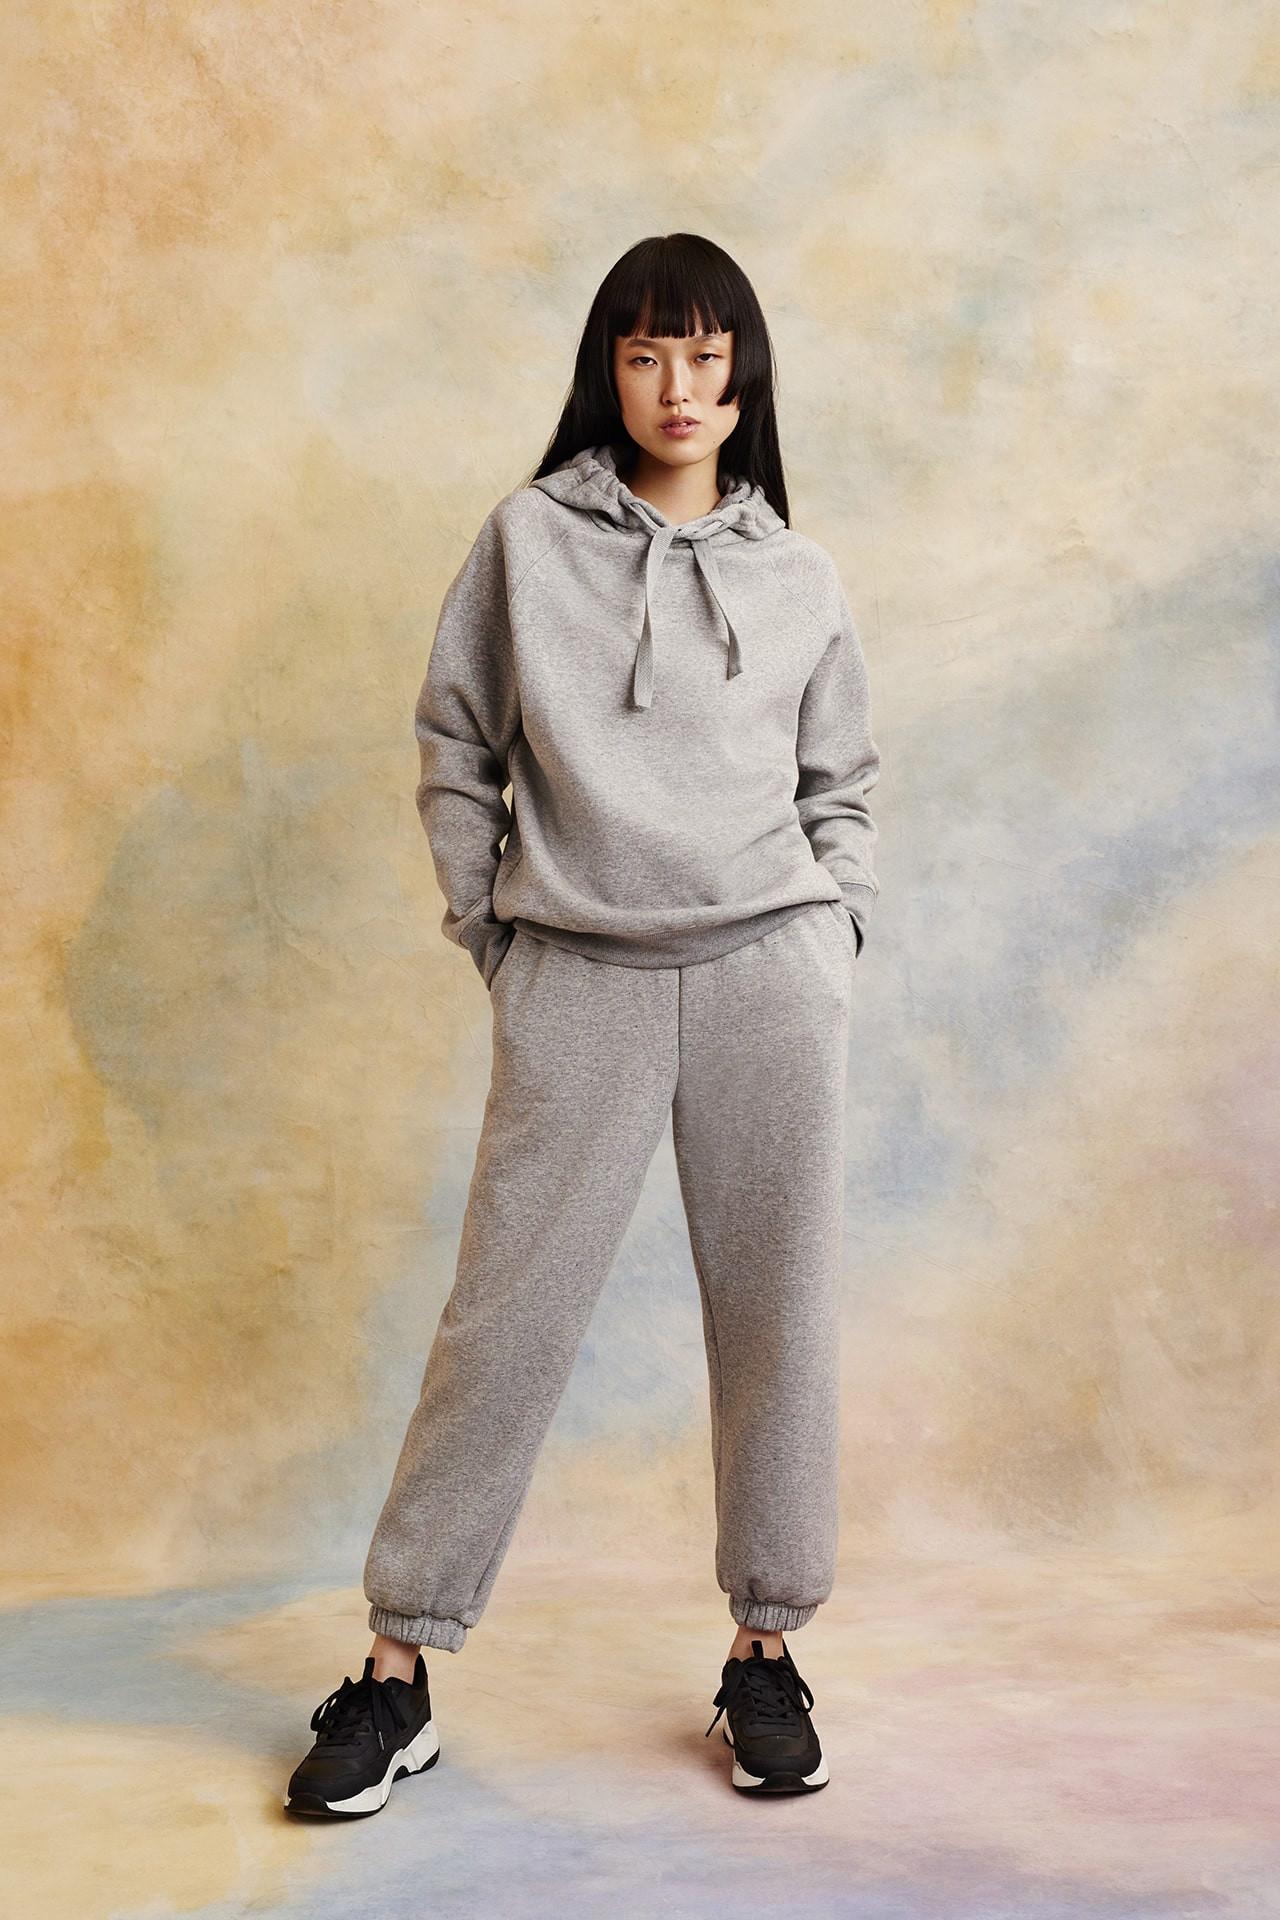 Primark launches new sustainable women’s leisurewear collection with recycled cotton innovator